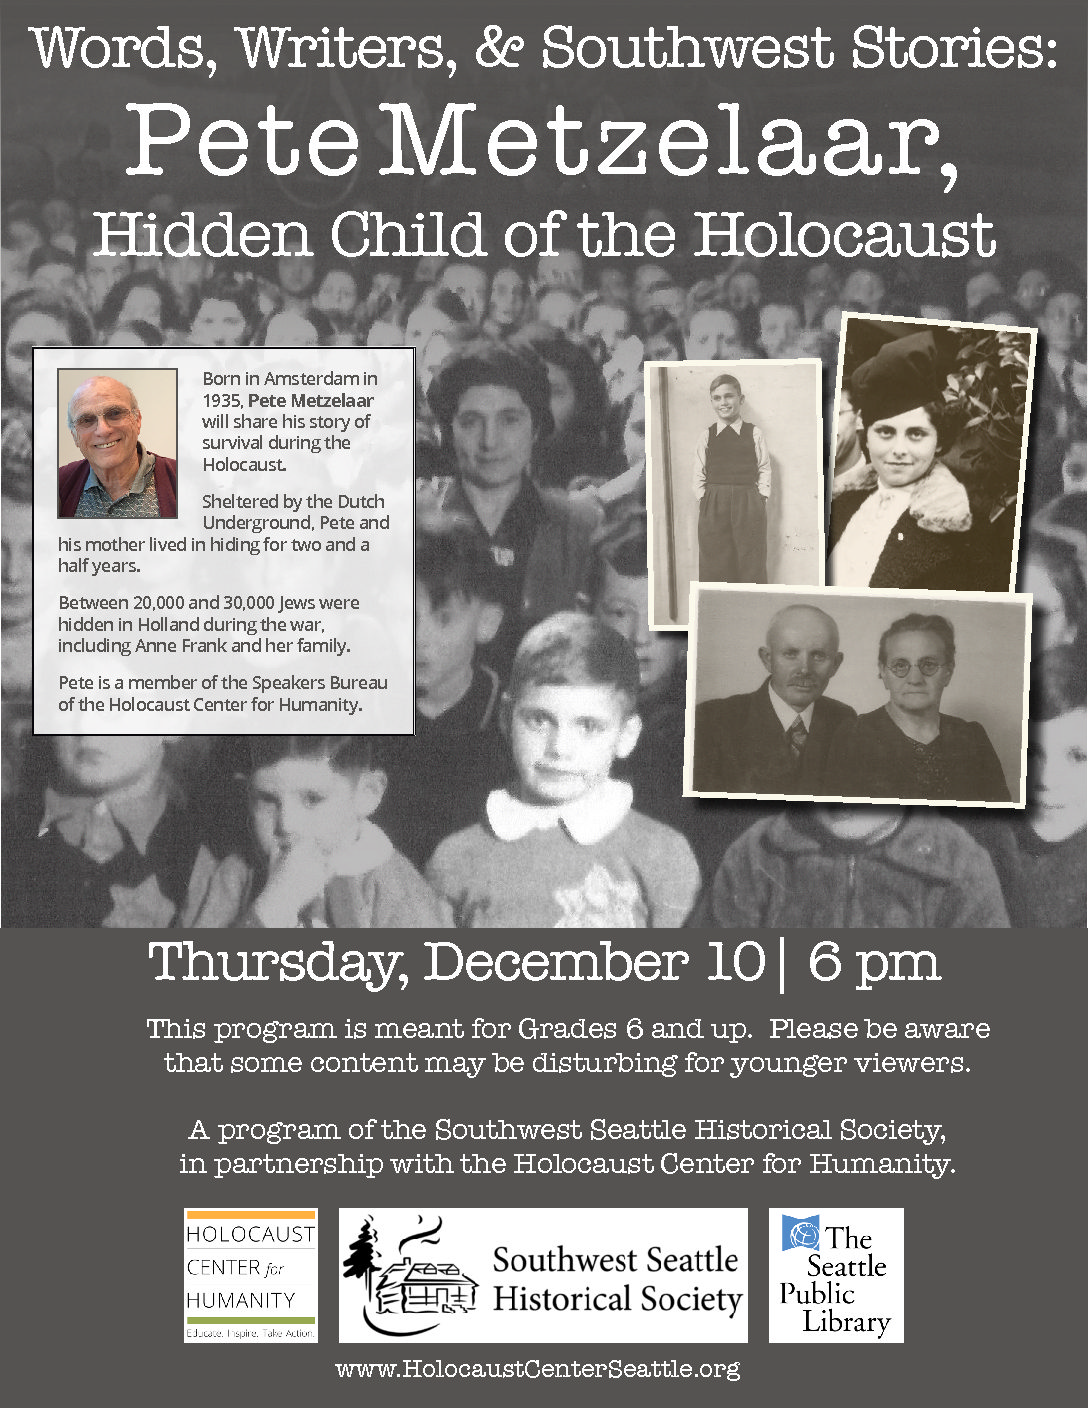 Thumbnail for the post titled: December 10 Words, Writers, and Southwest Stories: Hidden Child of the Holocaust